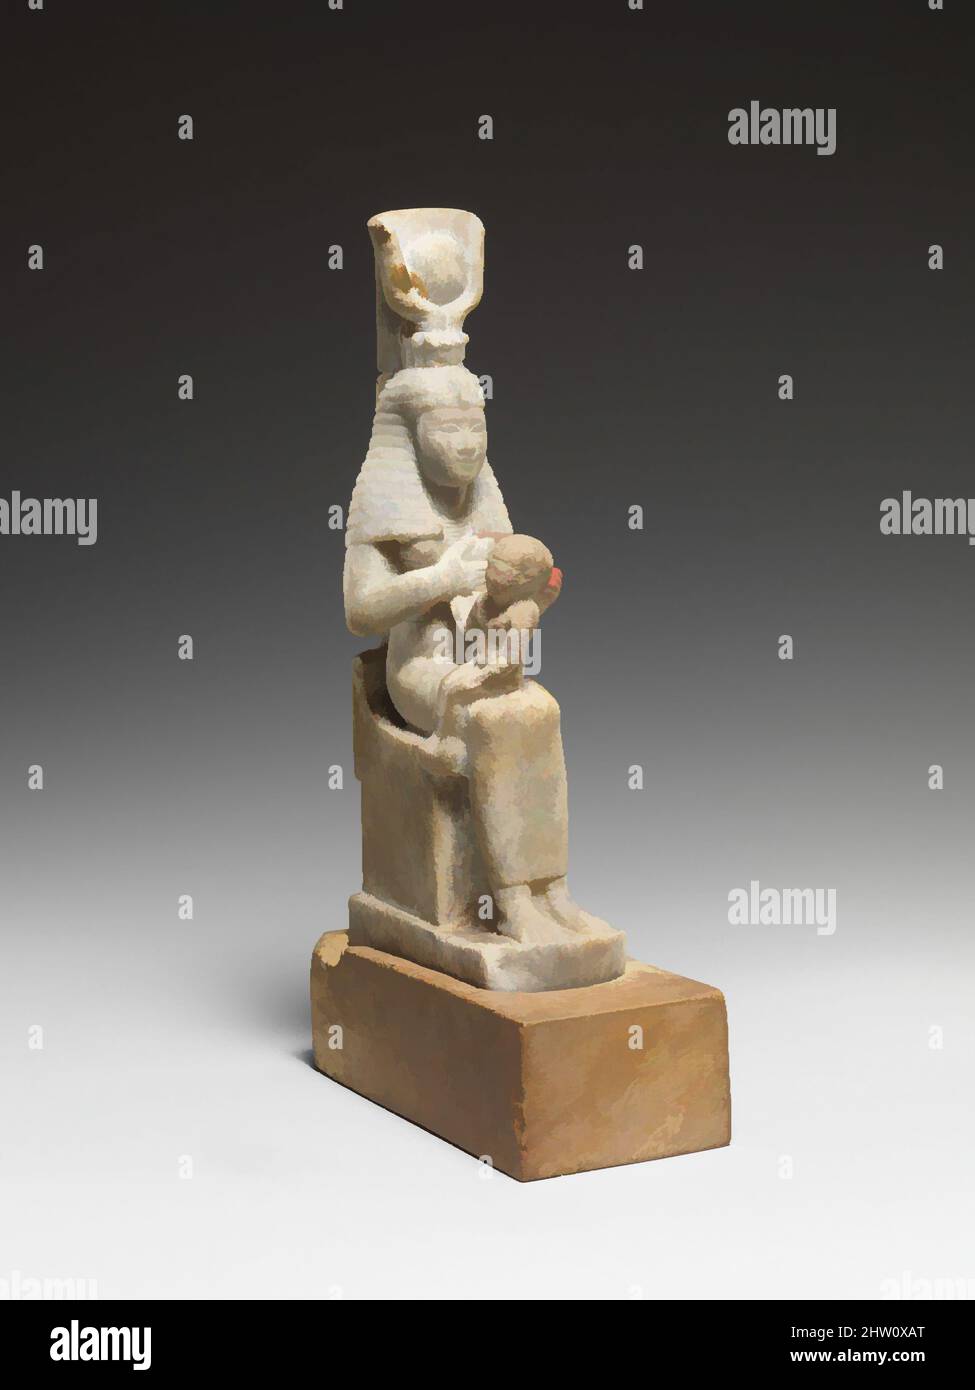 Art inspired by Isis with Horus, Ptolemaic Period, 332–30 B.C., From Egypt, Statue: marble; Base: limestone, H. 19.9 × W. 5.1 × D. 10.4 cm (7 13/16 × 2 × 4 1/8 in.), Isis with her son Horus seated on her lap is sculpted here in a marble with a distinctive bluish cast. It is notable, Classic works modernized by Artotop with a splash of modernity. Shapes, color and value, eye-catching visual impact on art. Emotions through freedom of artworks in a contemporary way. A timeless message pursuing a wildly creative new direction. Artists turning to the digital medium and creating the Artotop NFT Stock Photo